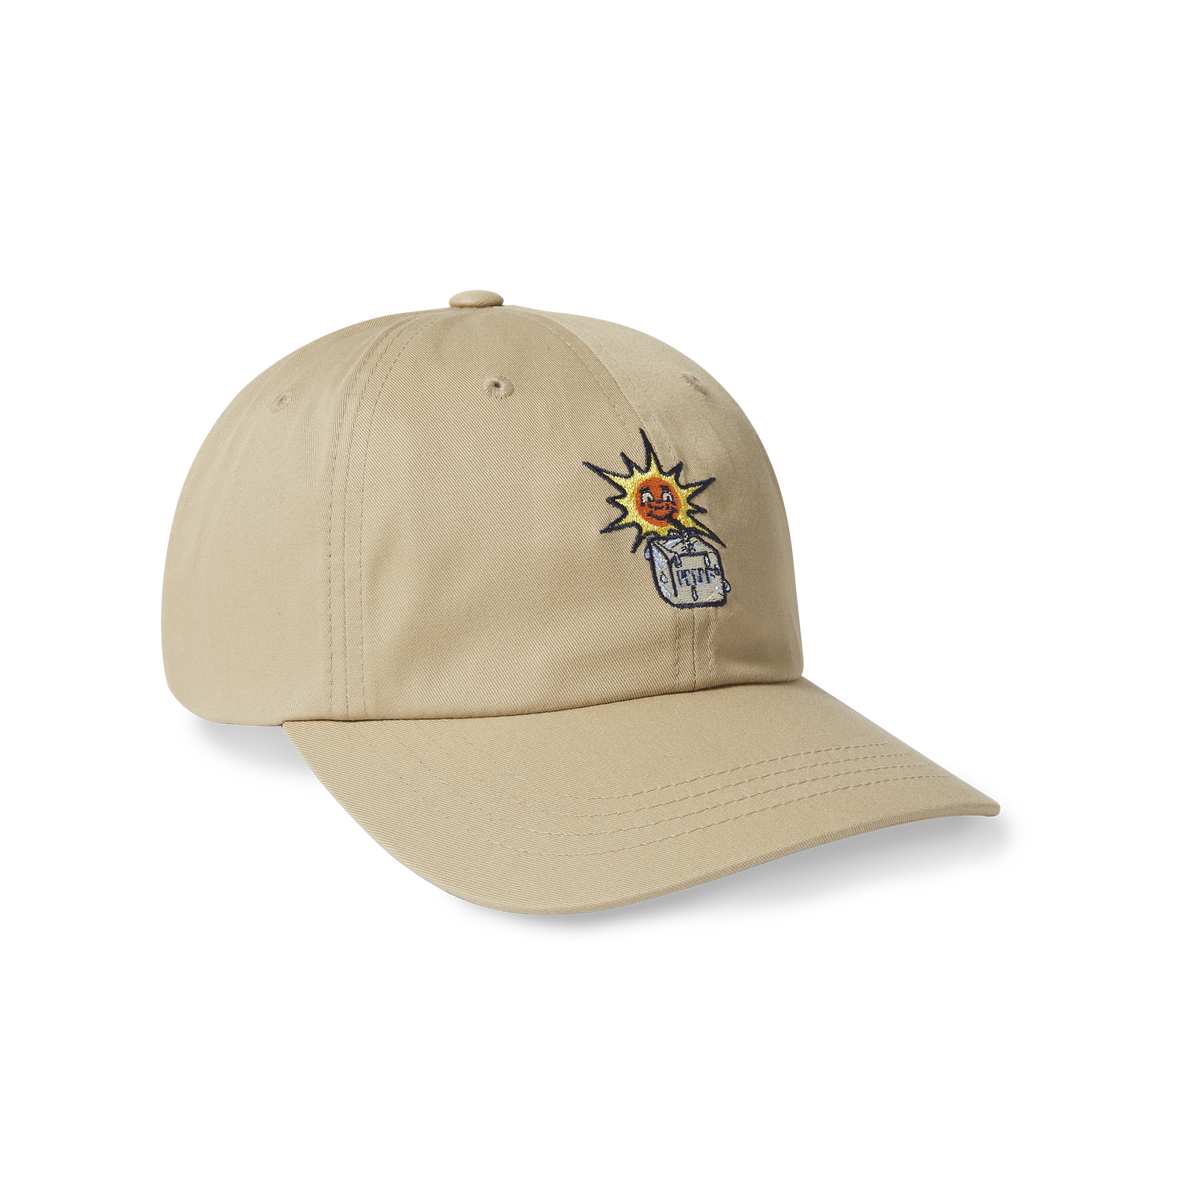 HUF - SIPPIN' SUN CURVED VISOR 6-PANEL HAT - CLAY